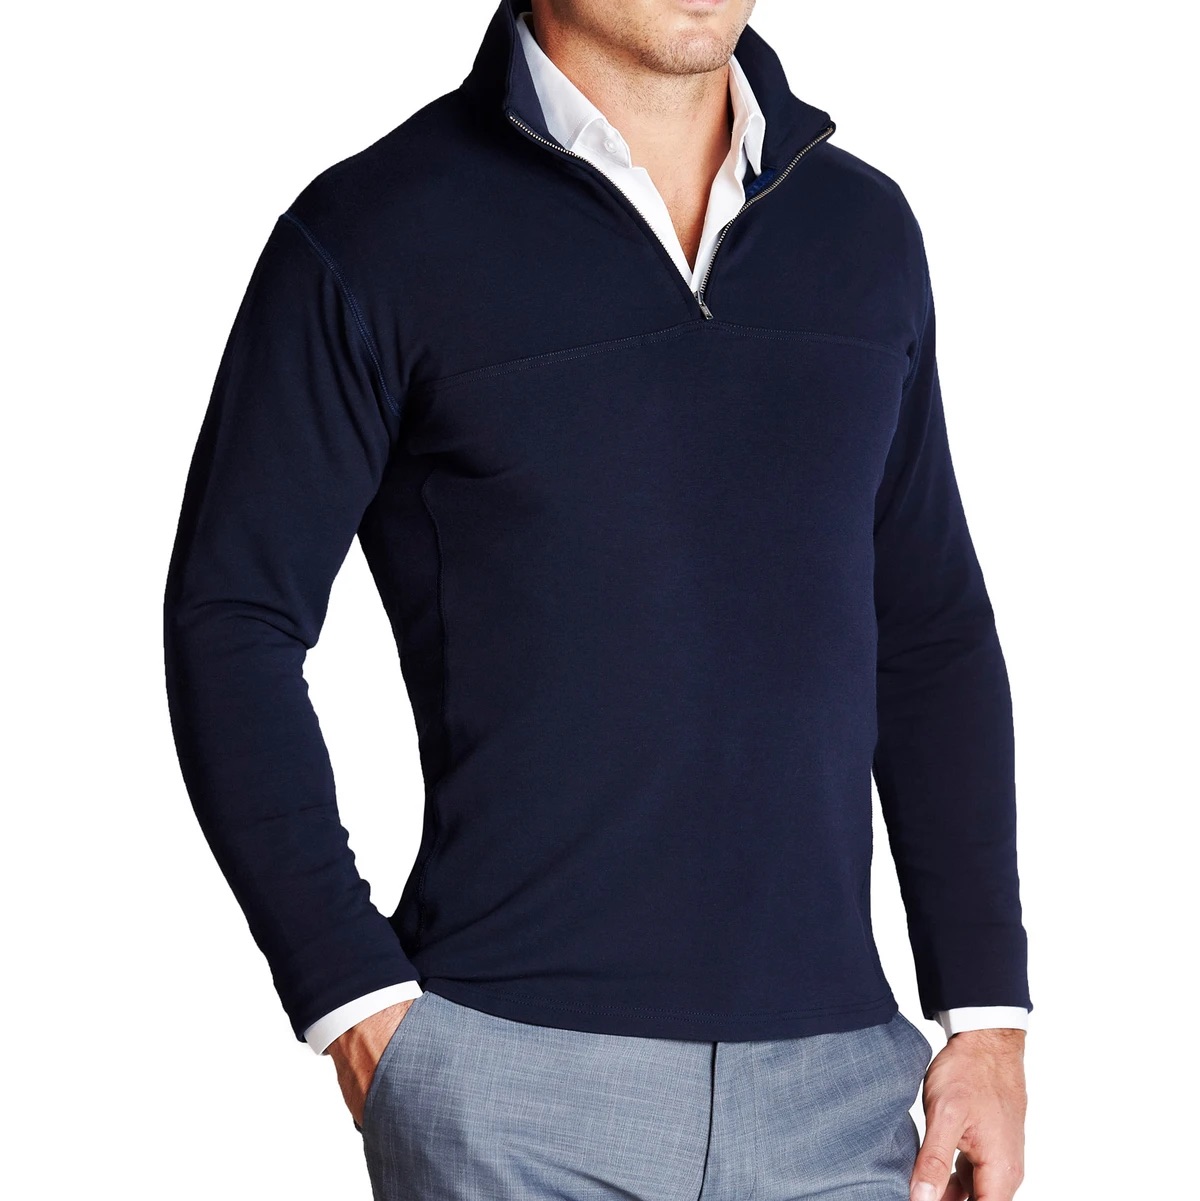 State and Liberty Solid Navy Quarter-Zip Sweater, $115